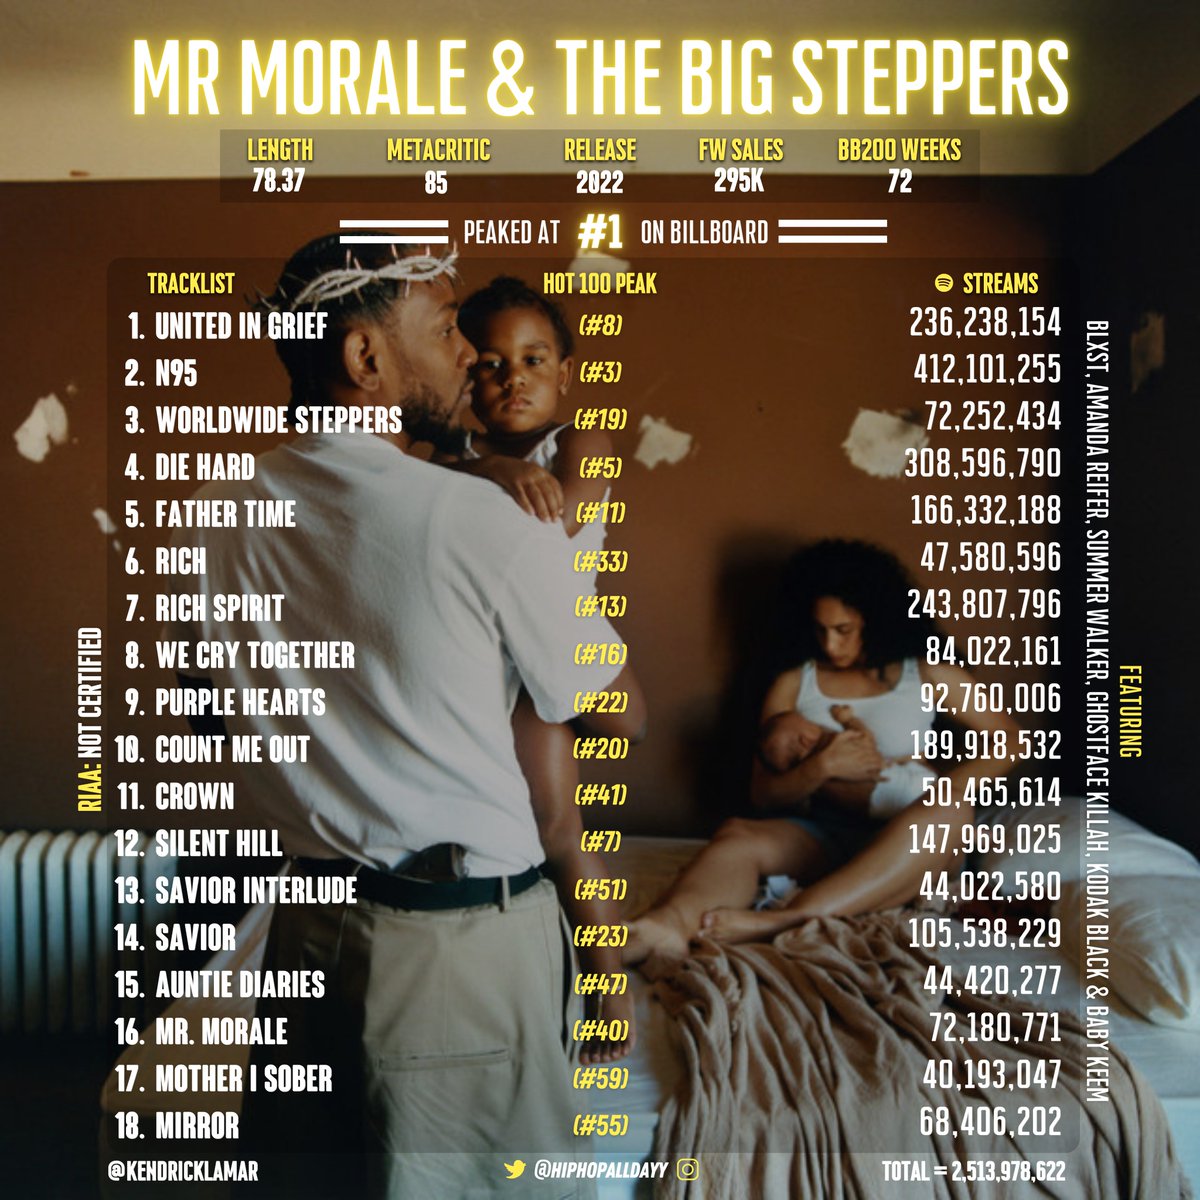 Kendrick Lamar released 'Mr. Morale & The Big Steppers' two years ago today 💿 • Eligible for 2x platinum • 2.5b+ streams on Spotify • Kendrick's fourth #1 album • Every song charted on Billboard • 5th biggest rap opening day of all time • 3rd most streamed rap album of